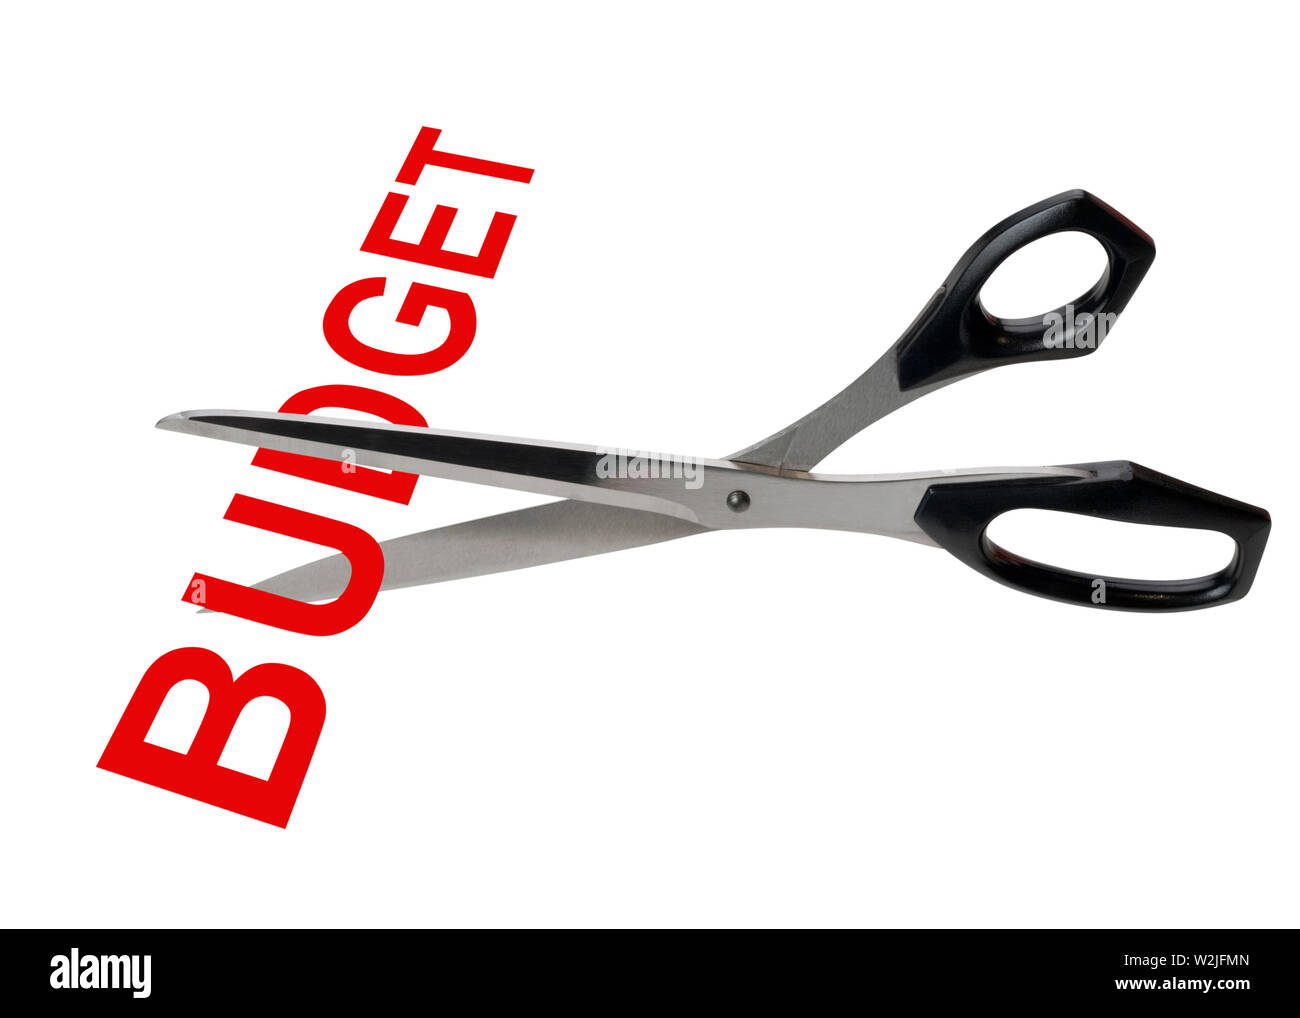 Save Download Preview Scissors cutting the word budget concept for recession or credit crisis, isolated Stock Photo